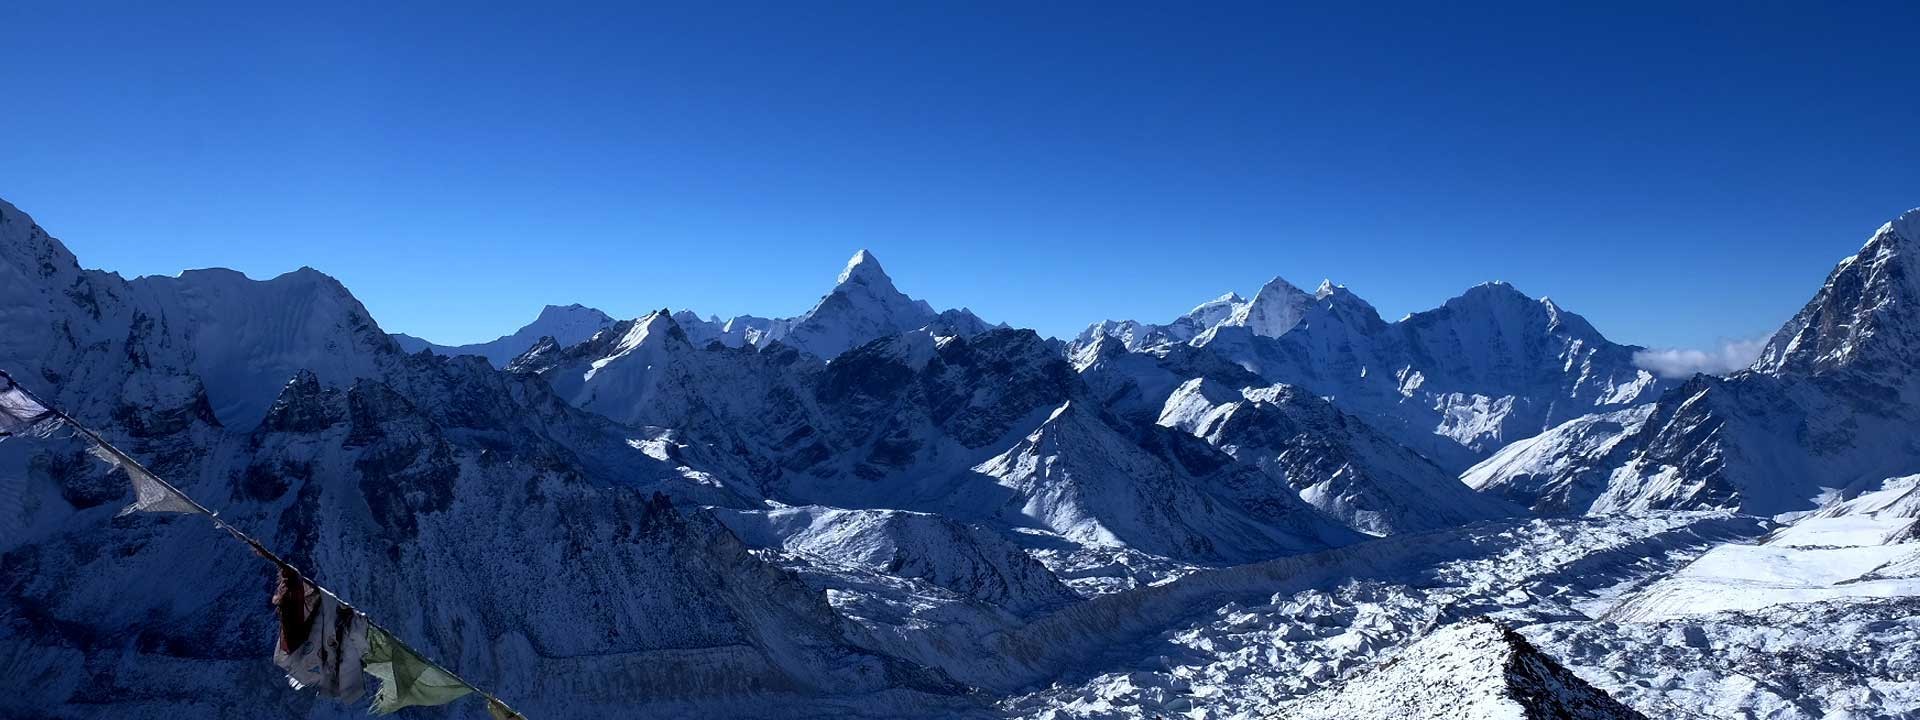 Everest Region Trekking Map and Complete Guide